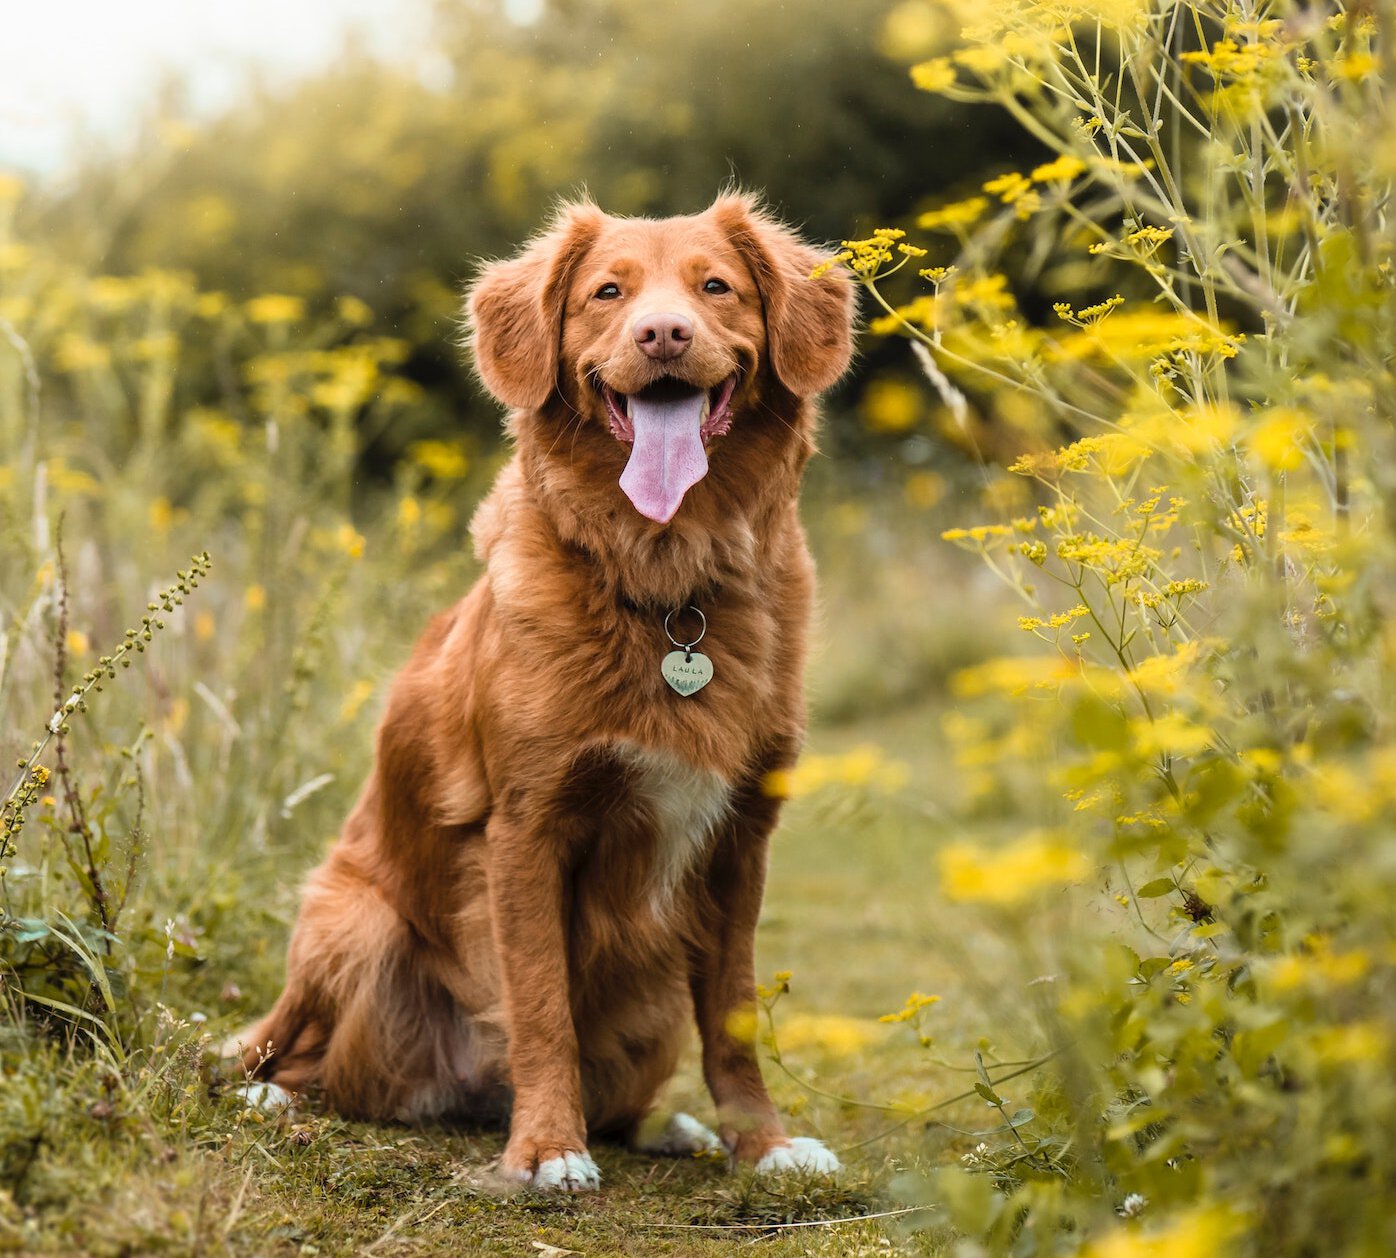 Dog happily sitting on a trail amongst flowers